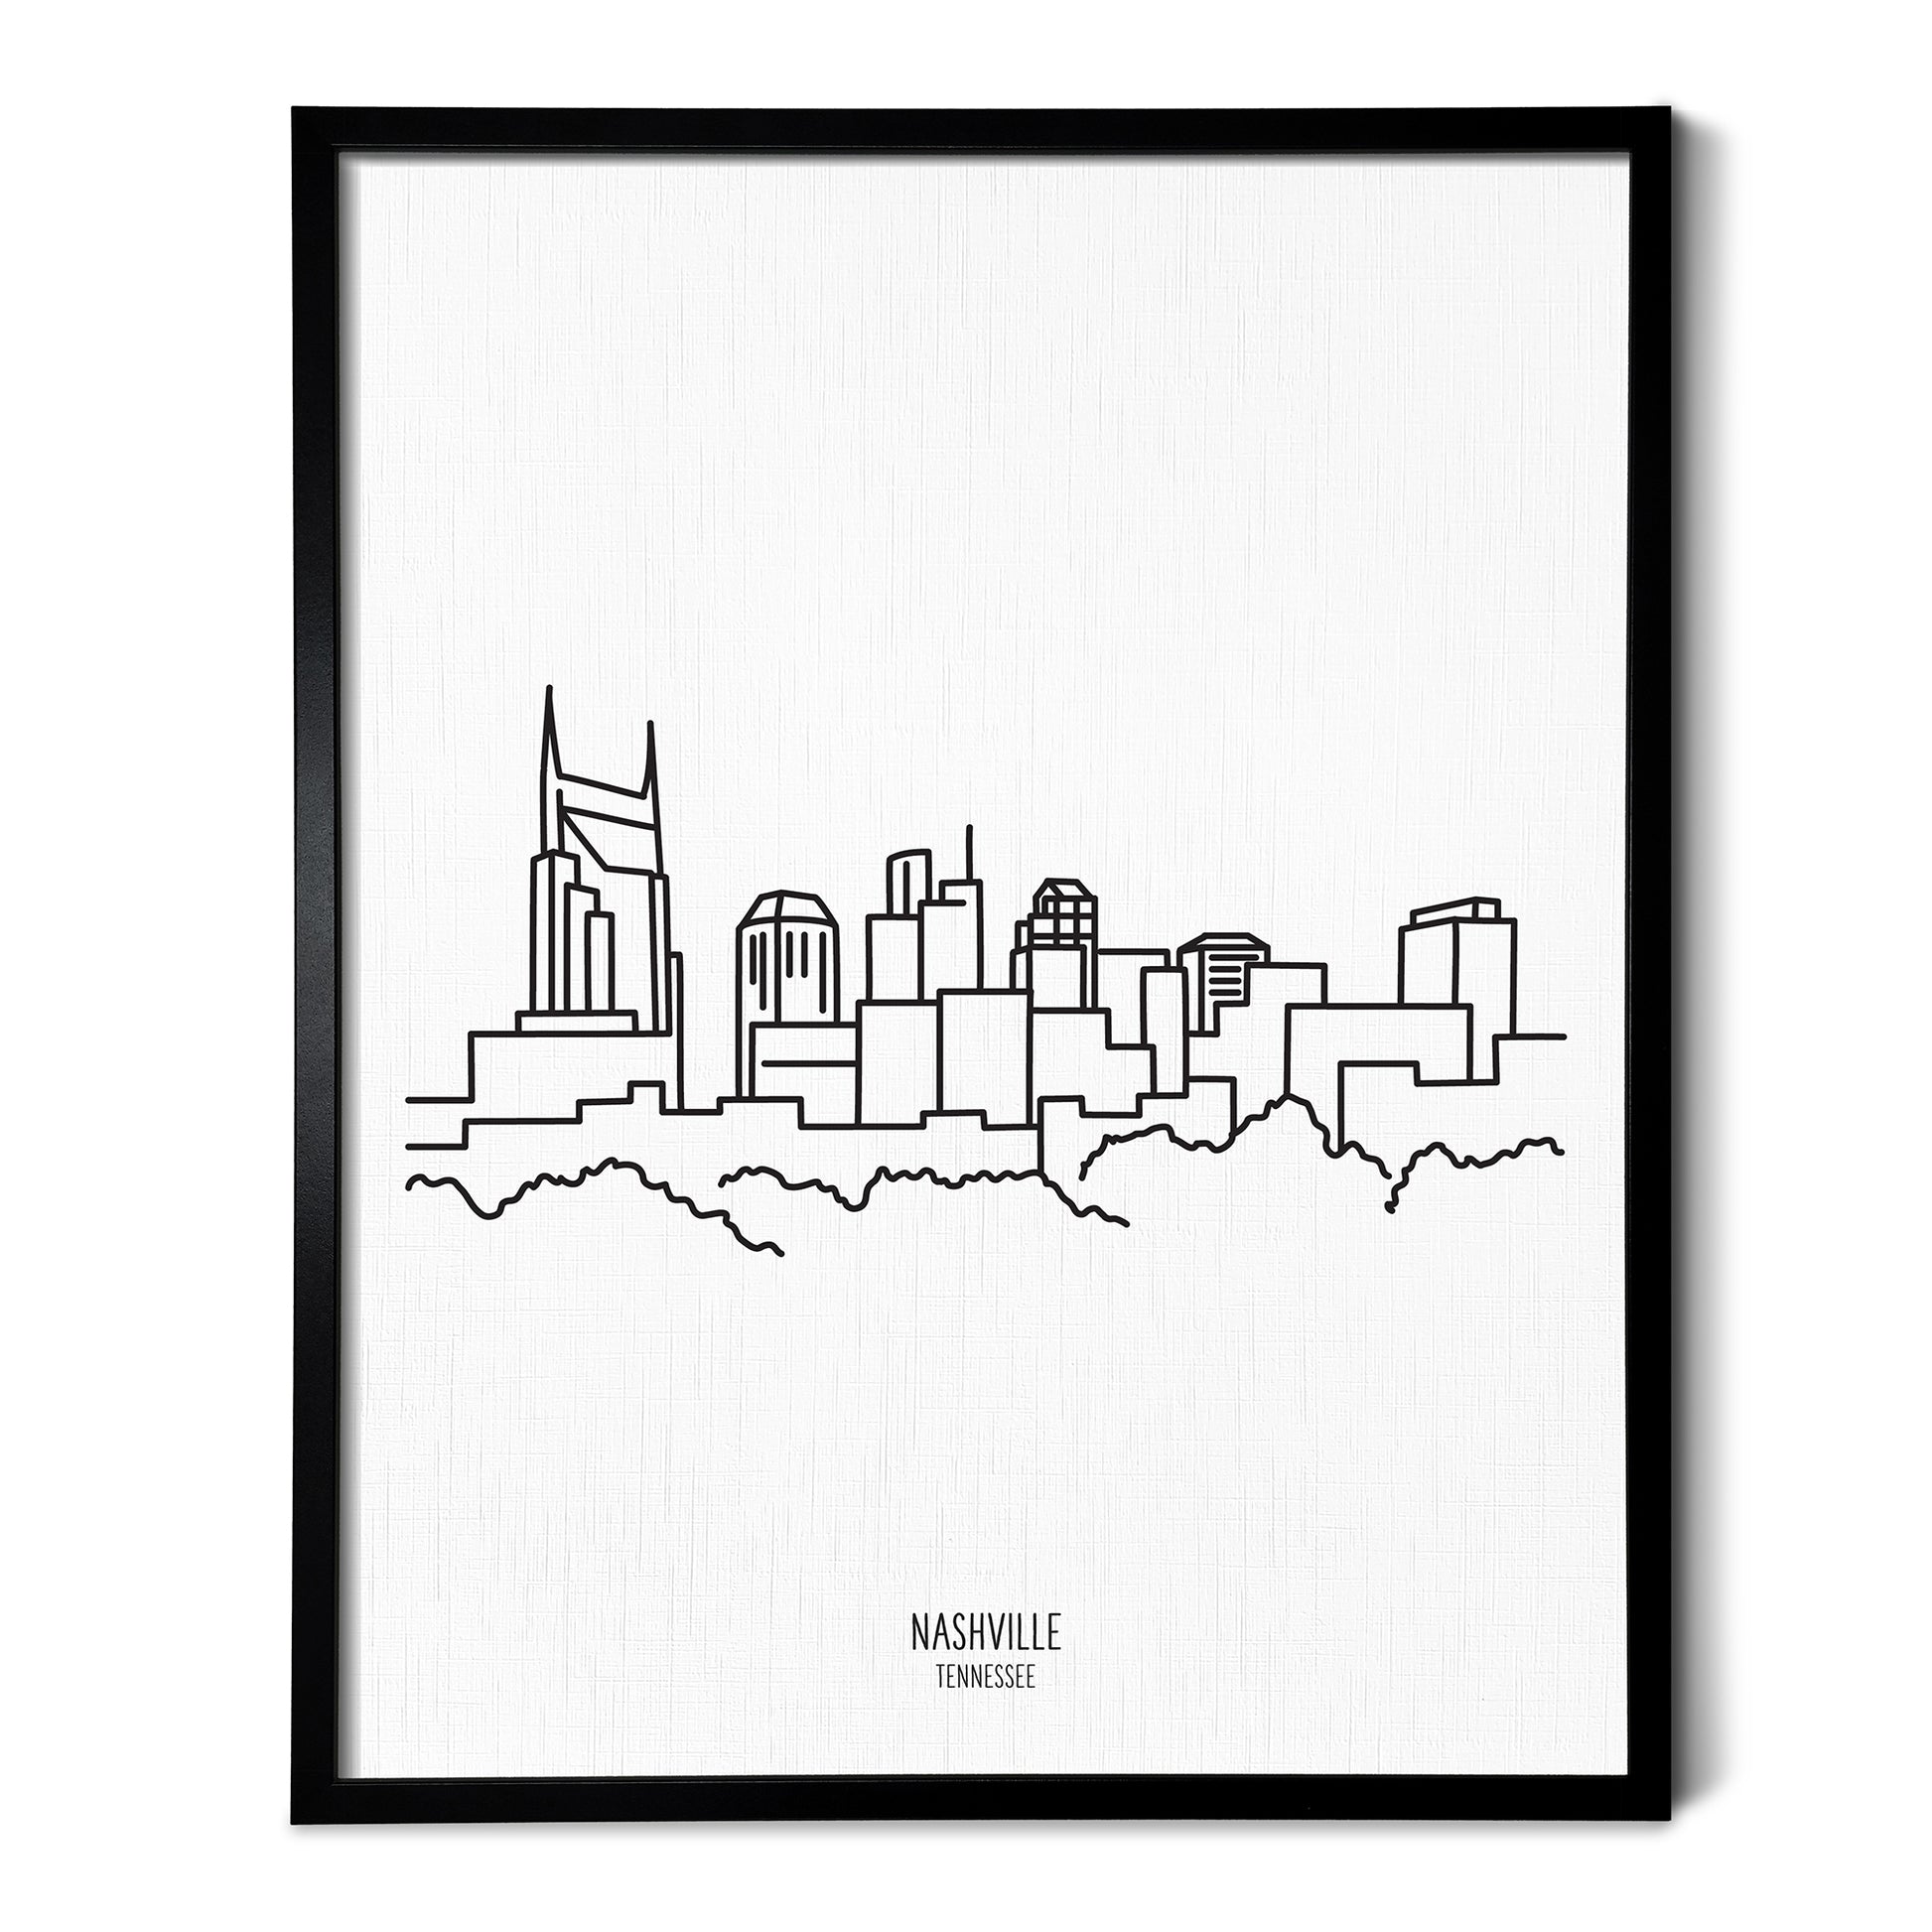 A line art drawing of the Nashville Tennessee Skyline on white linen paper in a thin black picture frame